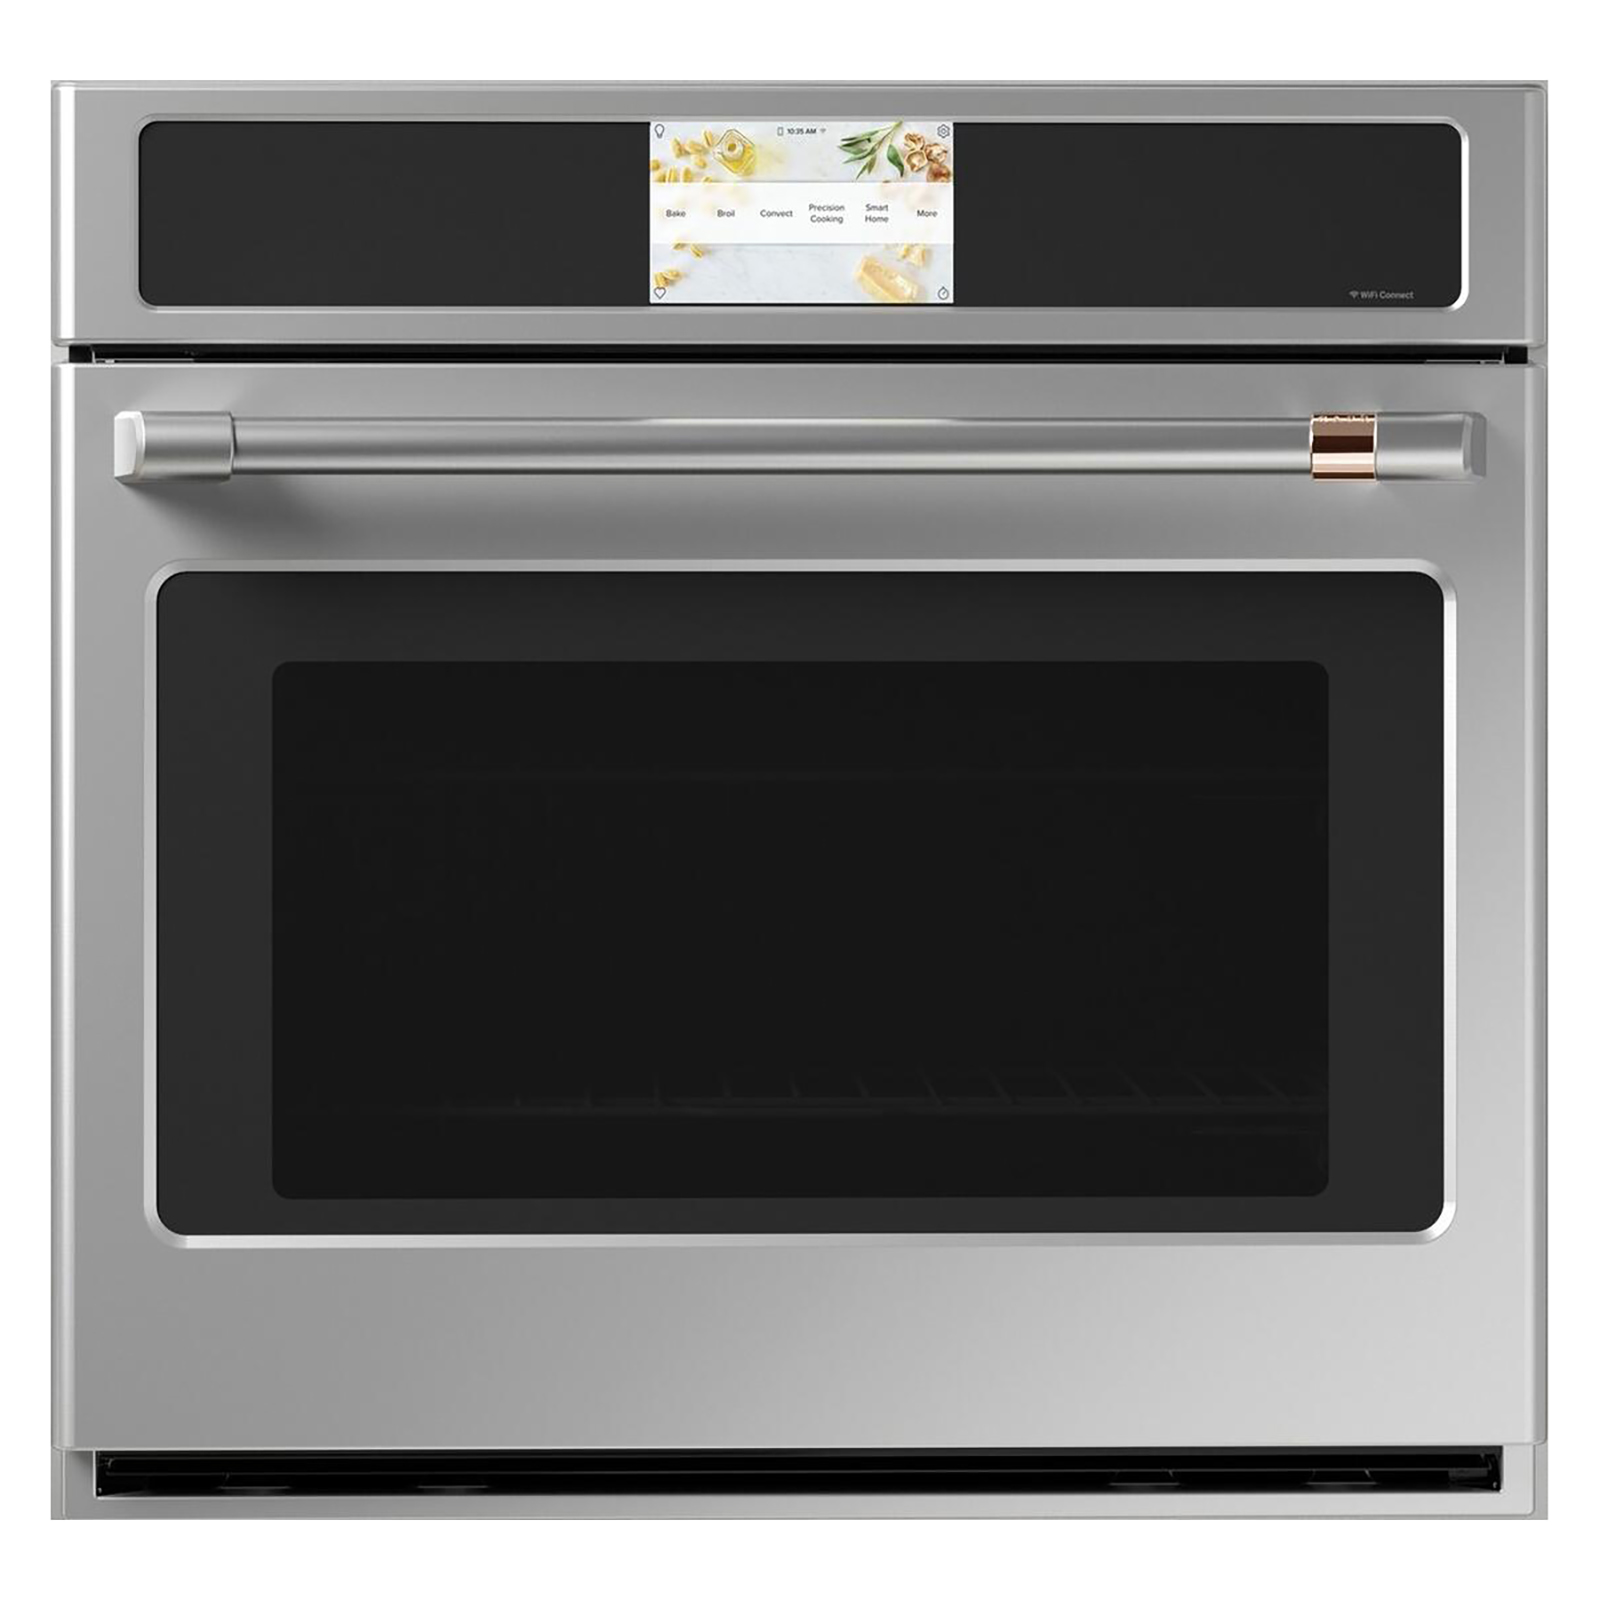 CAFE CTS90DP2NS1 30" Professional Smart Built-In Convection Single Wall Oven